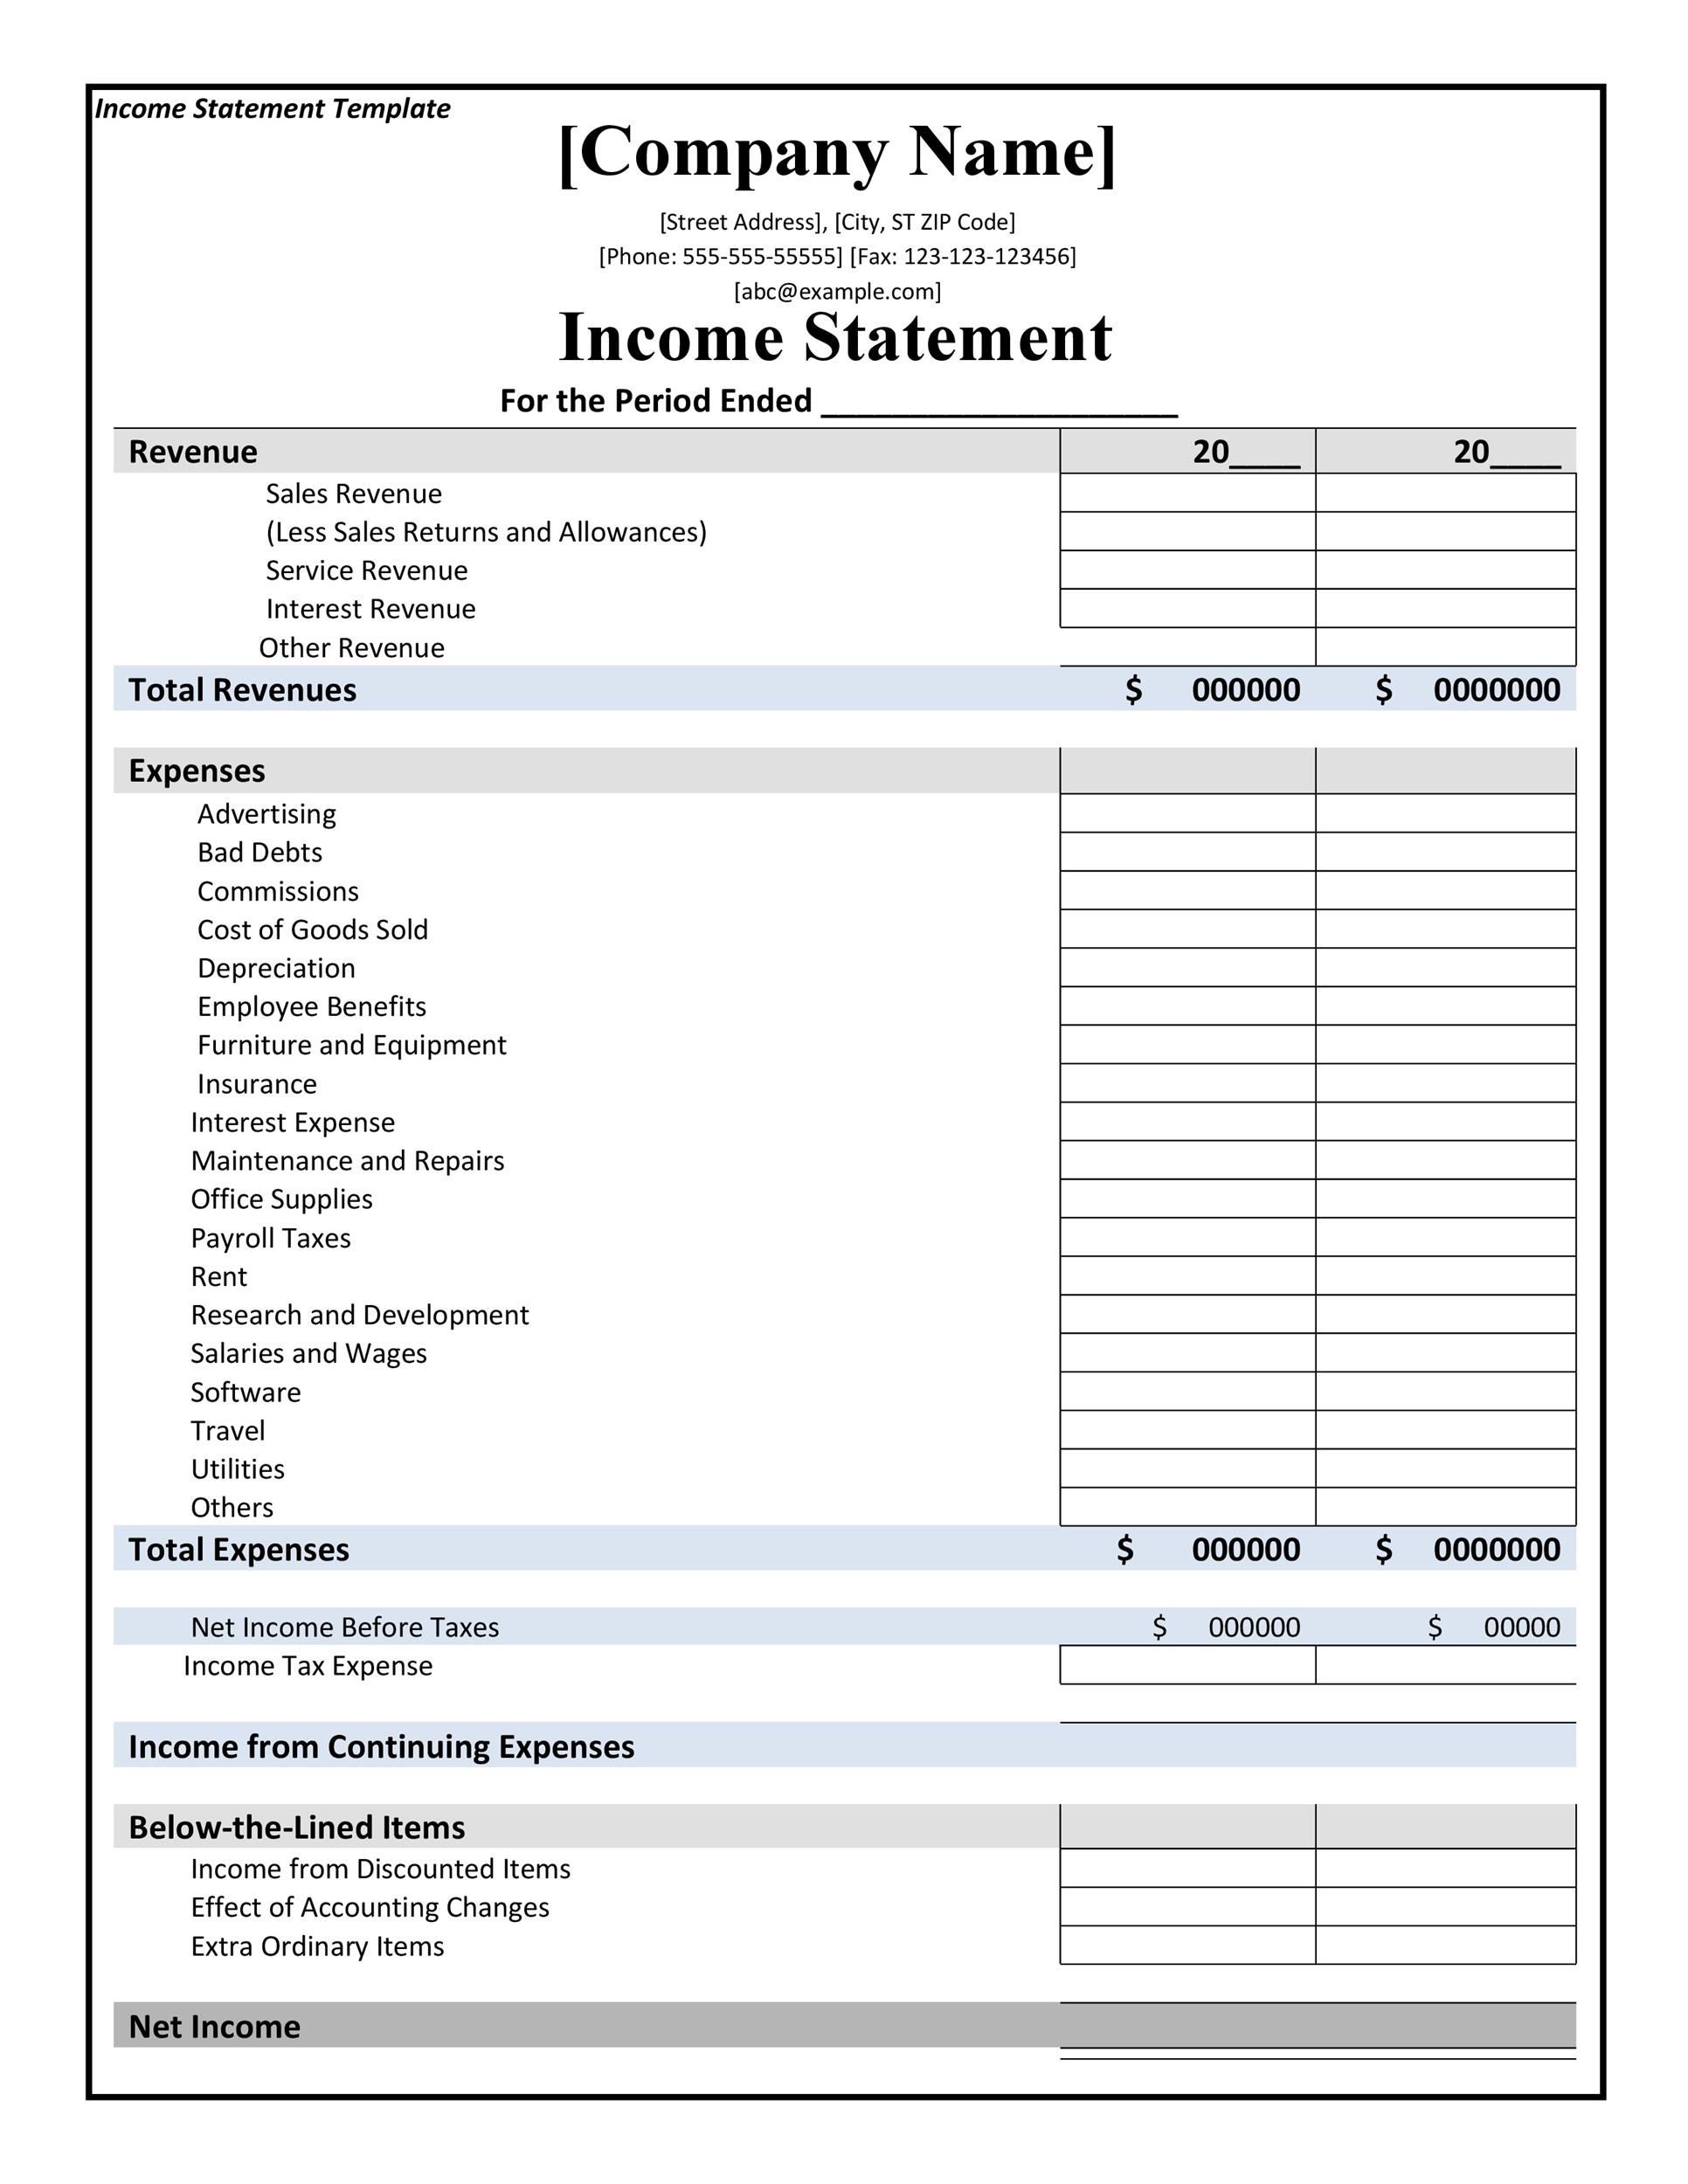 41-free-income-statement-templates-examples-template-lab